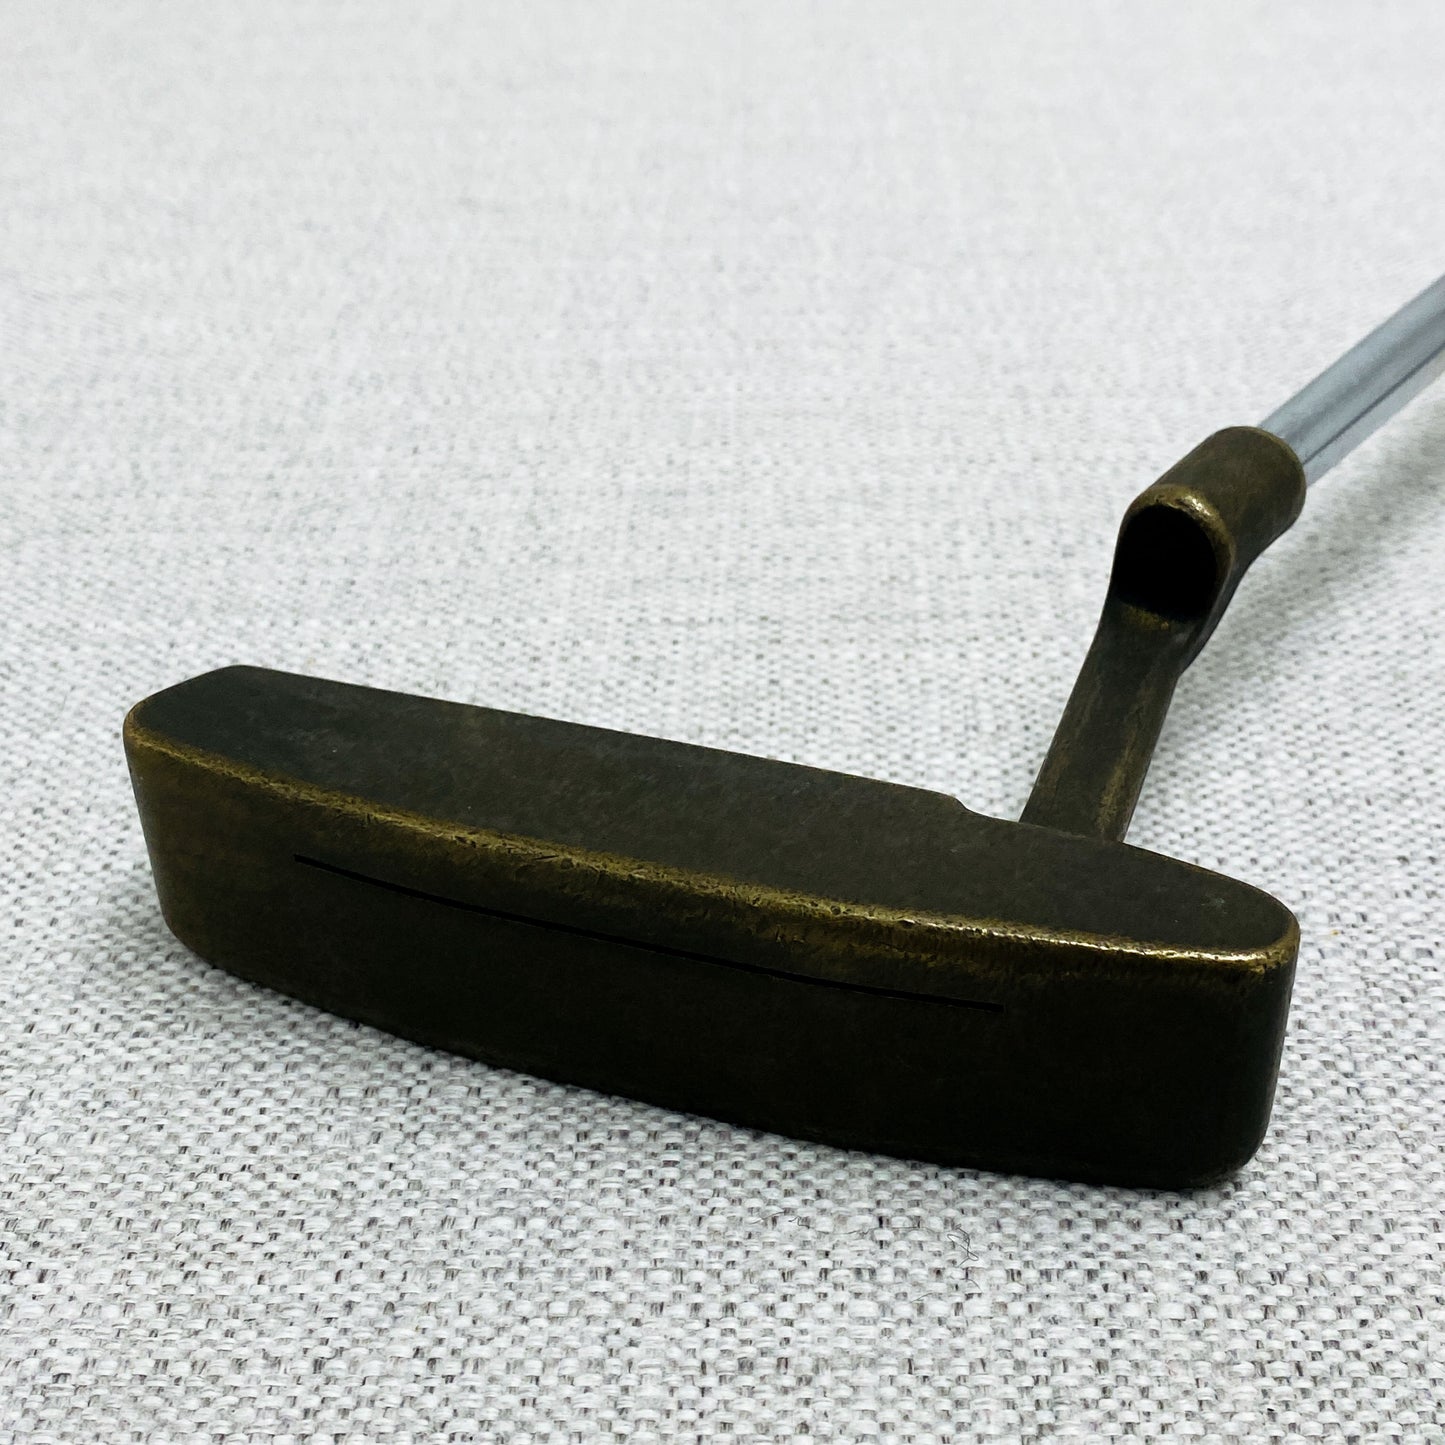 PING Anser Manganese Bronze Putter. 35 inch - Good Condition # T1019